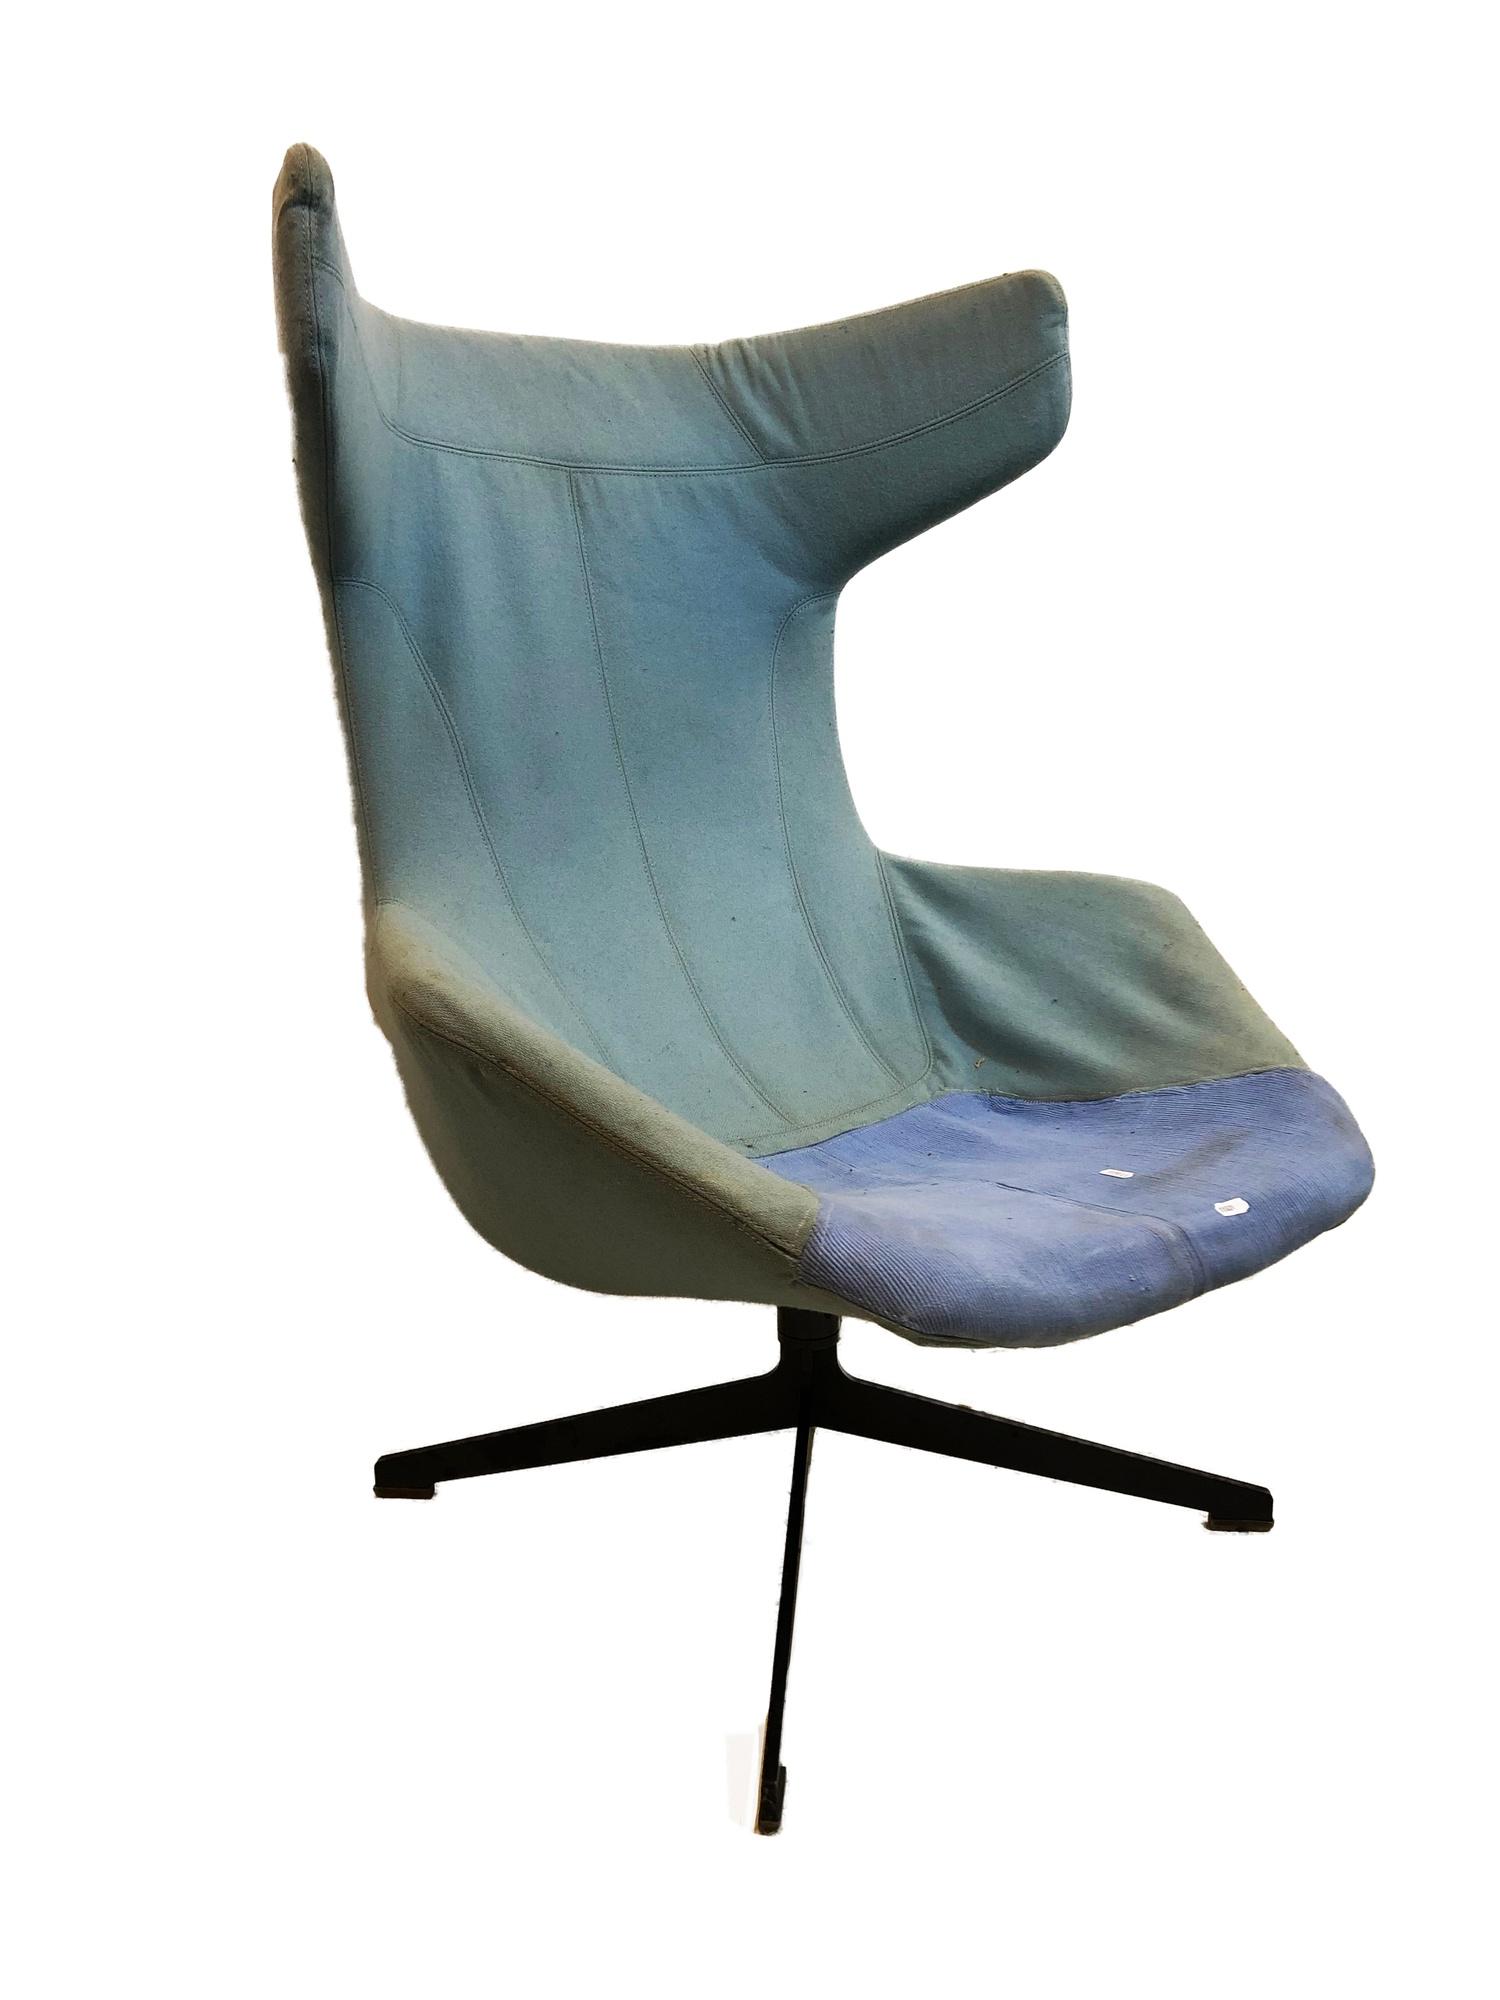 Alfredo Haberli 'Take A Line For A Walk' Chair on 4 spoke swivel base, fabric upholstery (possibly - Image 2 of 3